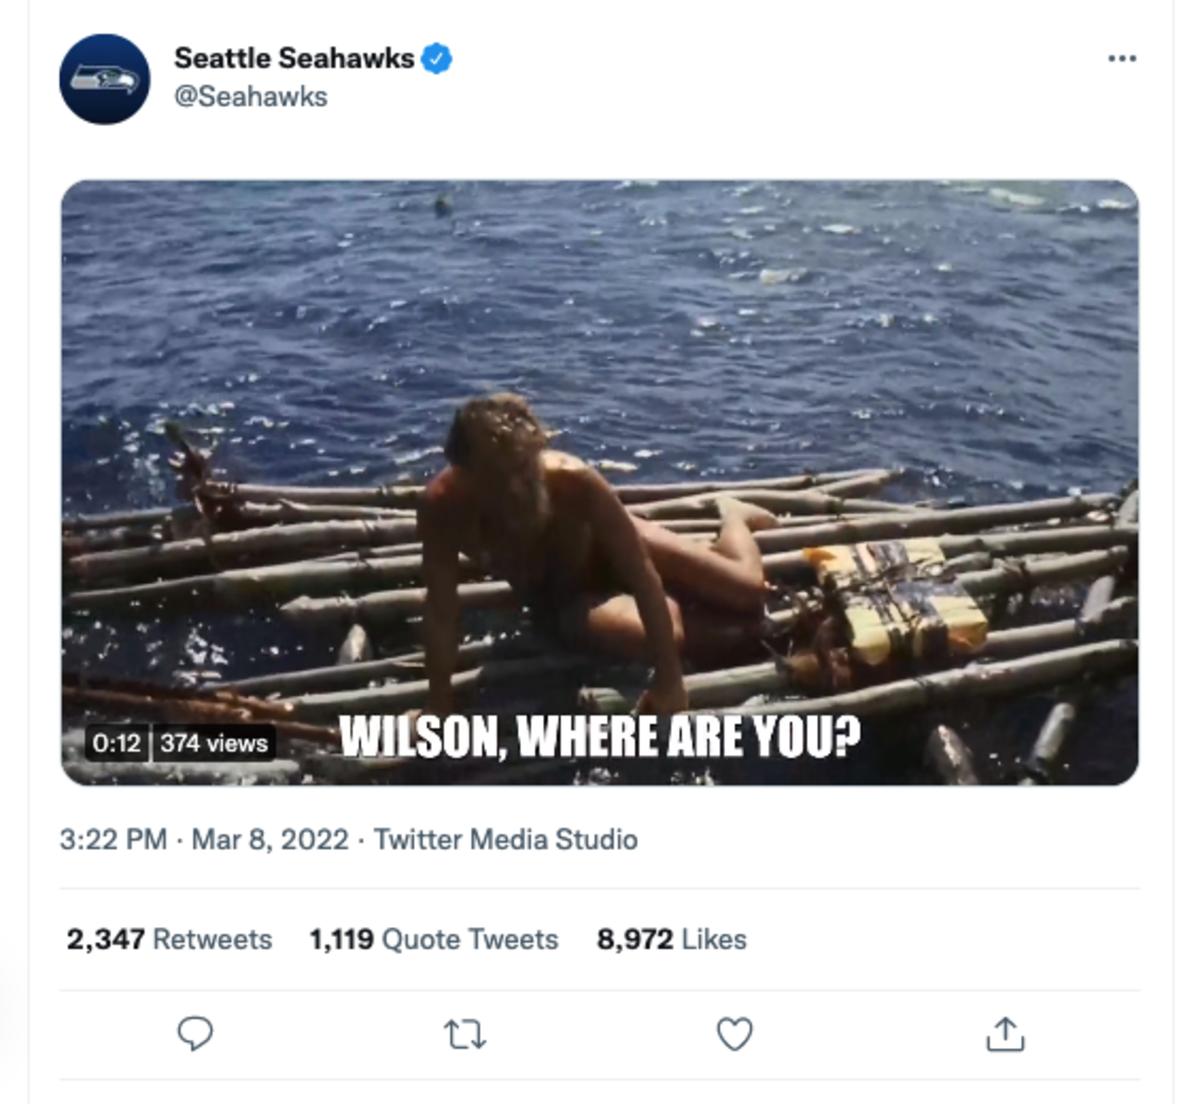 The Seahawks tweeted a video from Cast Away, mocking the trade they made that sent Wilson to the Broncos.